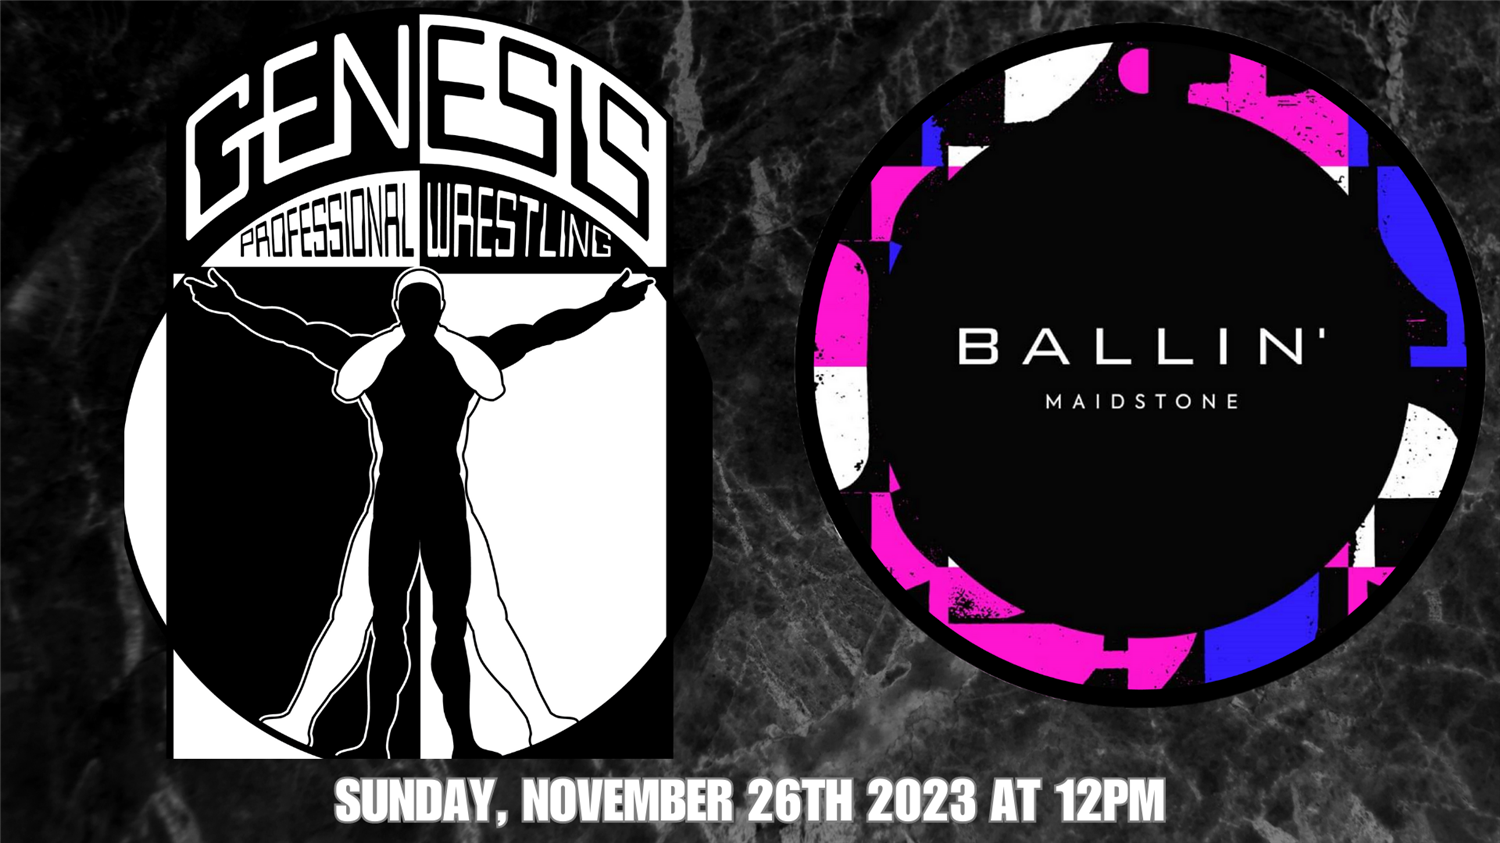 Genesis Professional Wrestling Family Show Ballin' Maidstone, family Show 12PM on Nov 26, 12:00@Ballin' - Pick a seat, Buy tickets and Get information on Genesis Professional Wrestling 